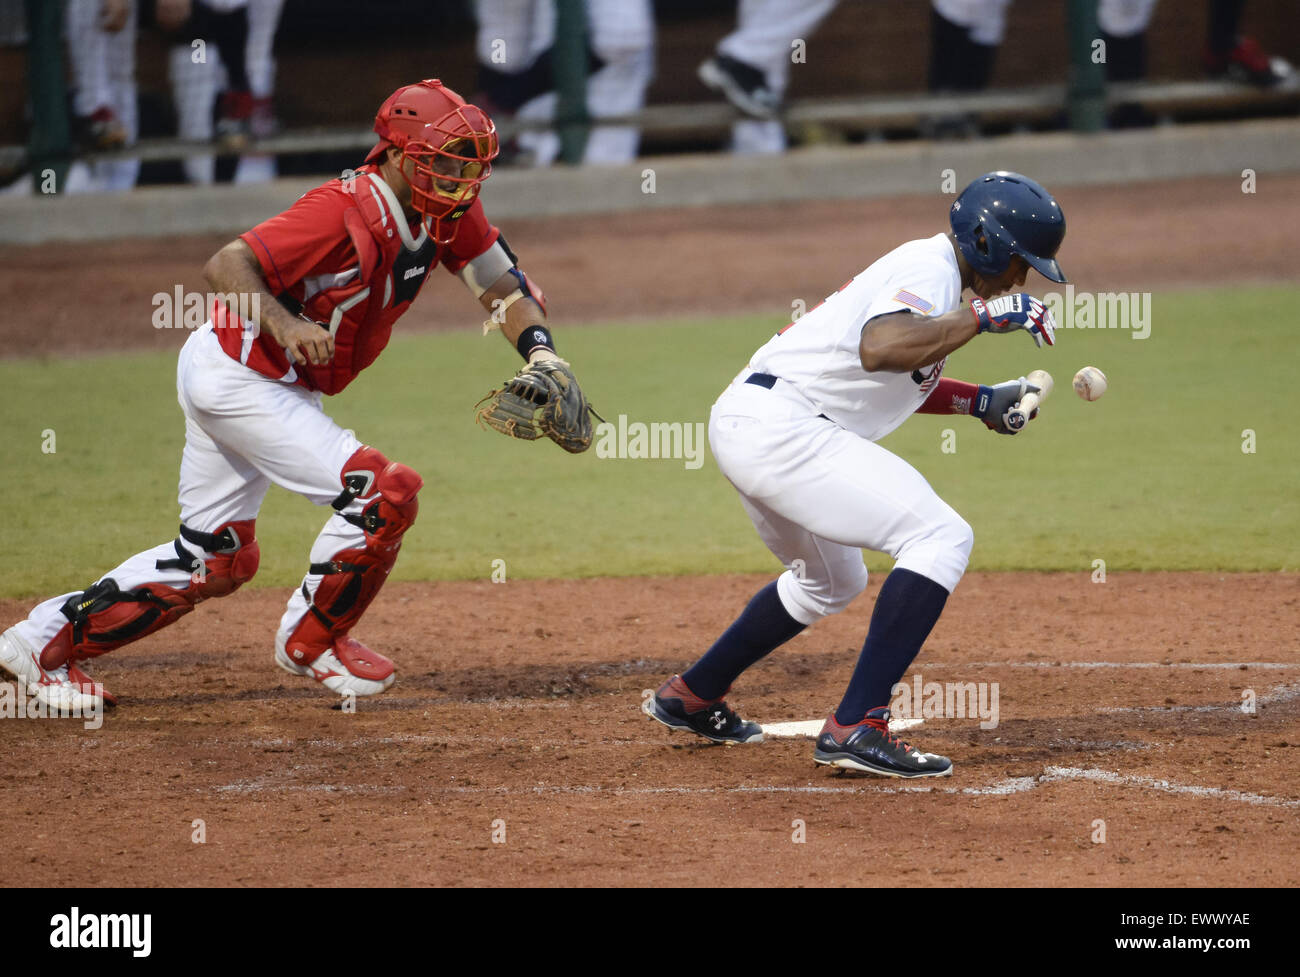 Cary, North Carolina, USA. 1st July, 2015. Corey Ray, right, of USA bunts a ball against catcher Yulexis La Rosa, left, of Cuba during game 1 of the USA Collegiate National Team versus Cuba National Team series played in Cary, N.C. on Wednesday, July 1, 2015. USA won 2-0. © Fabian Radulescu/ZUMA Wire/ZUMAPRESS.com/Alamy Live News Stock Photo